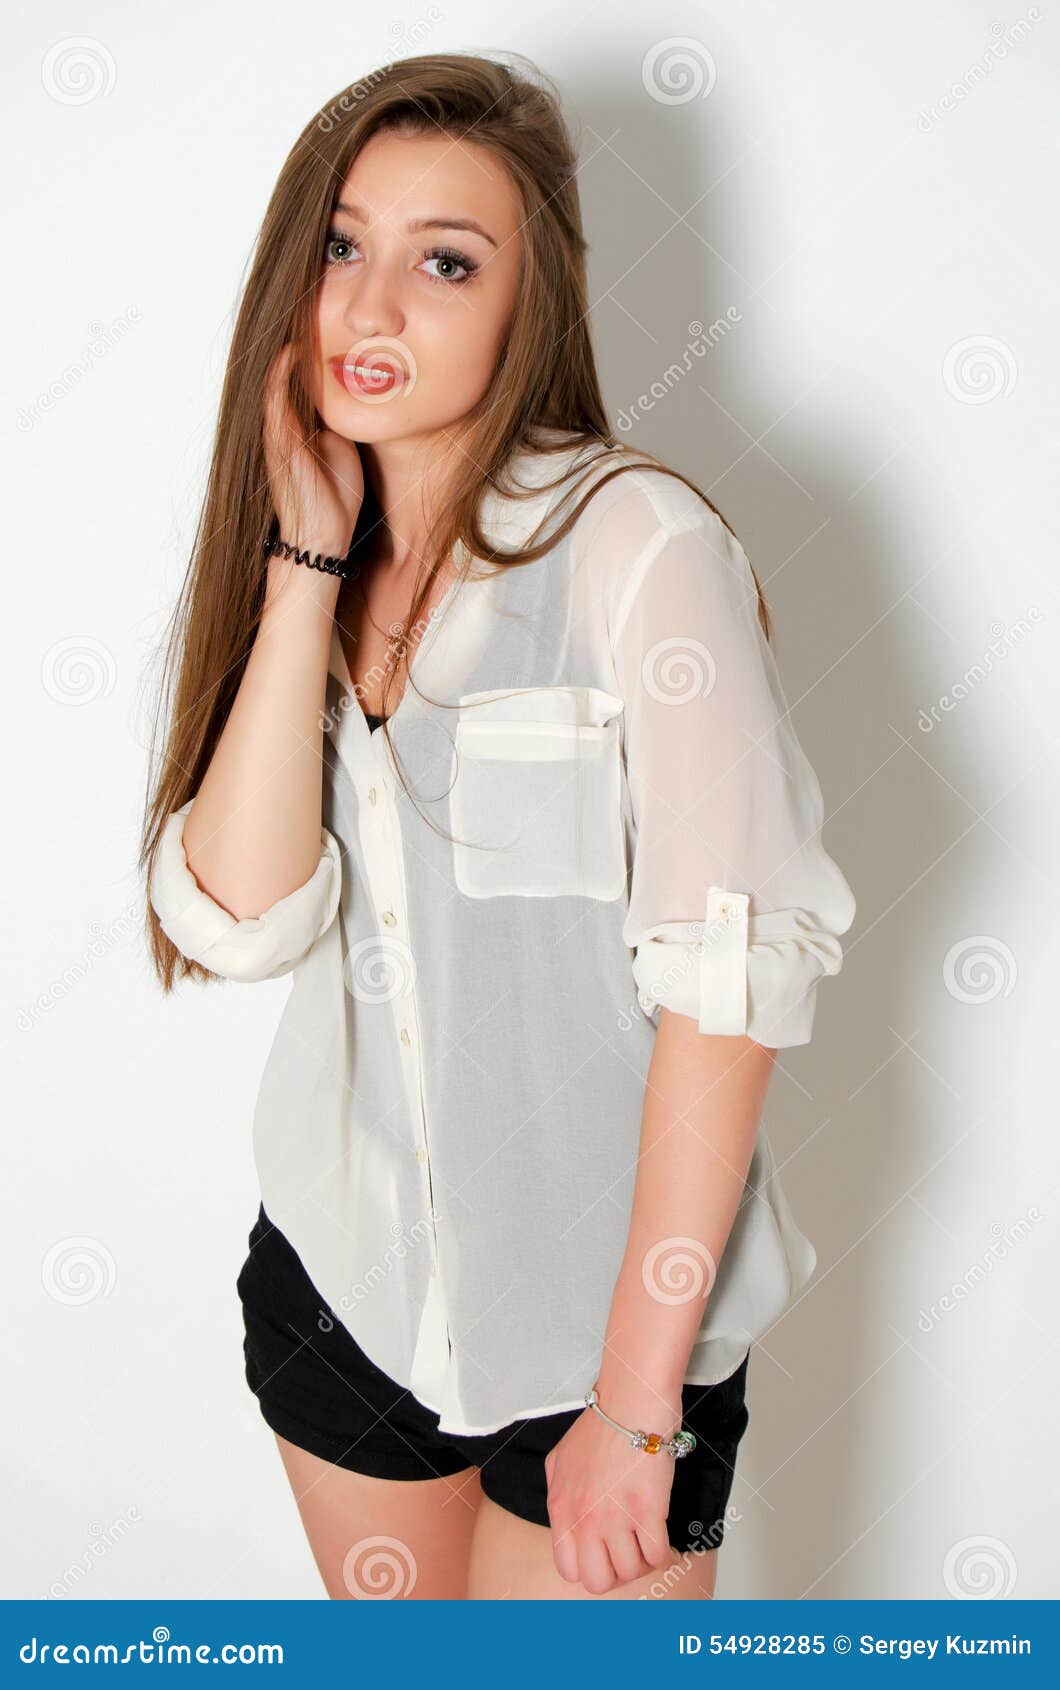 Shy girl. stock image. Image of emotions, timidity, youth - 54928285